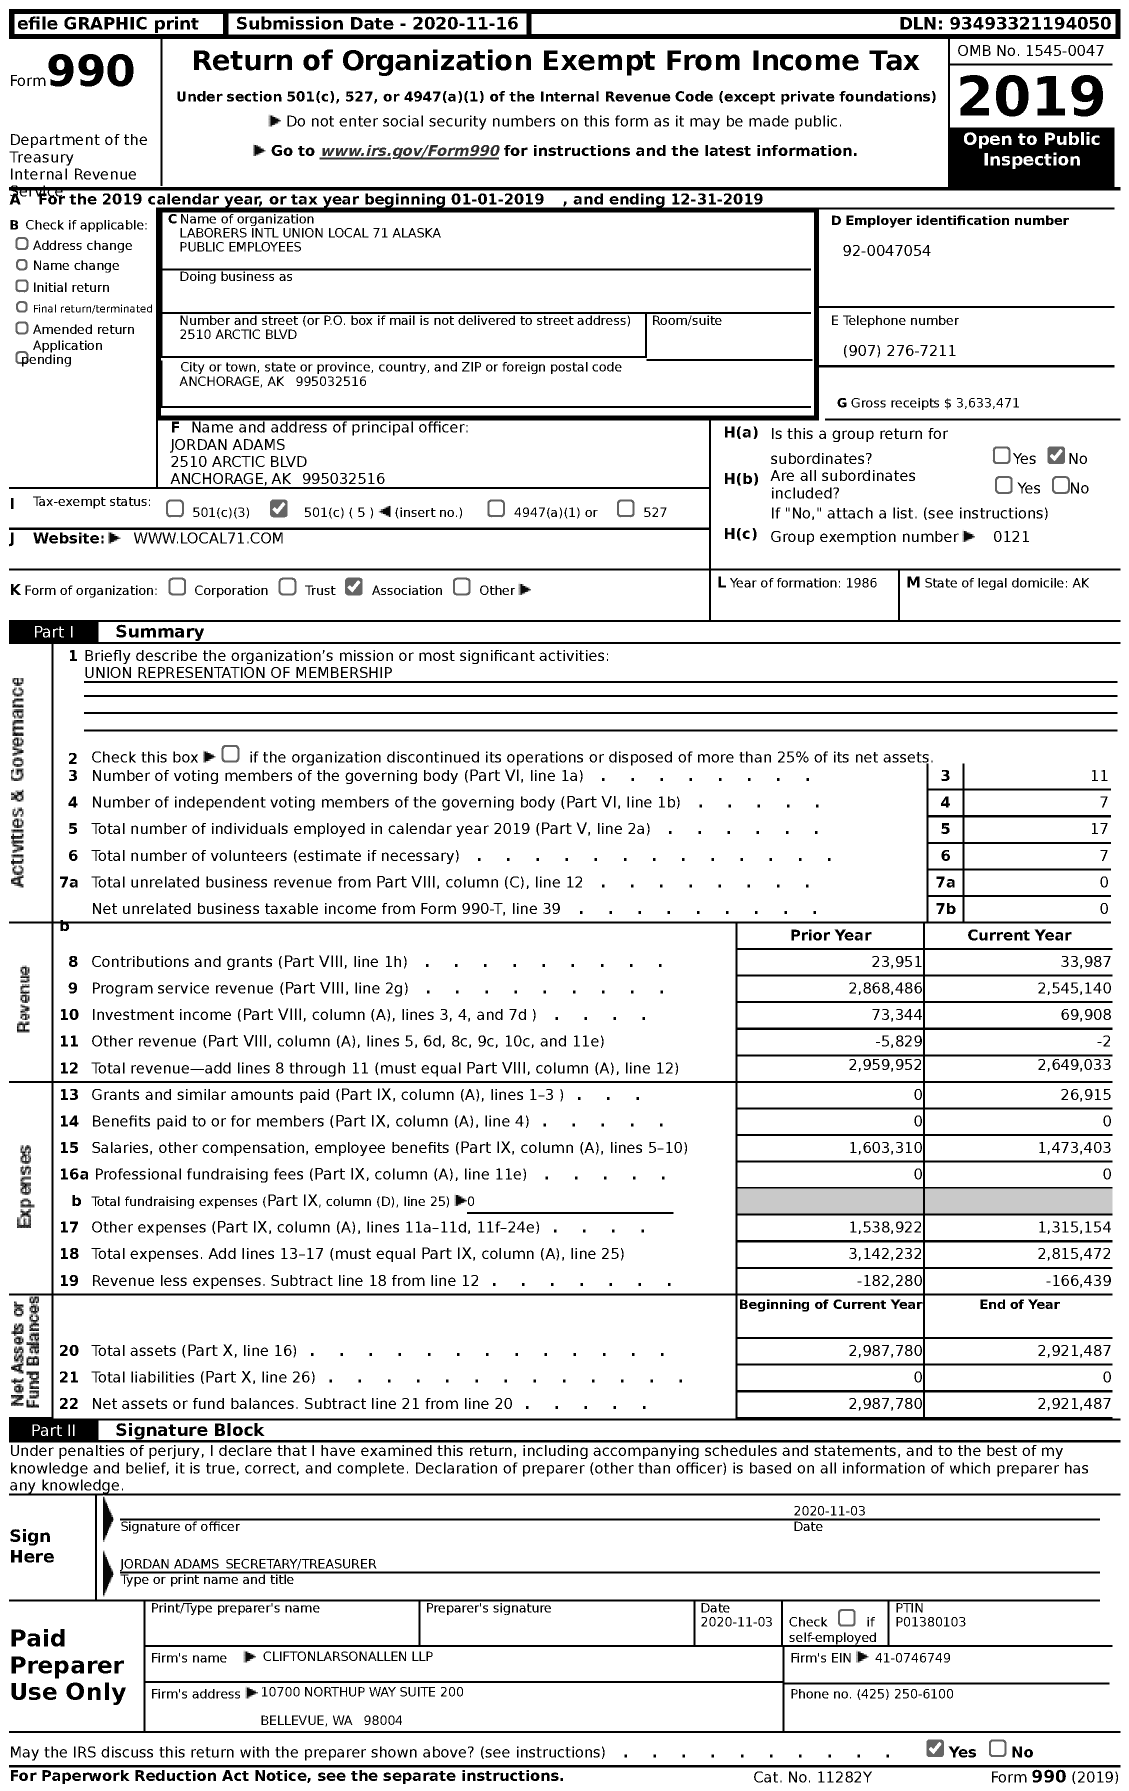 Image of first page of 2019 Form 990 for Laborers' International Union of North America - 71 Alaska Public Service Employees